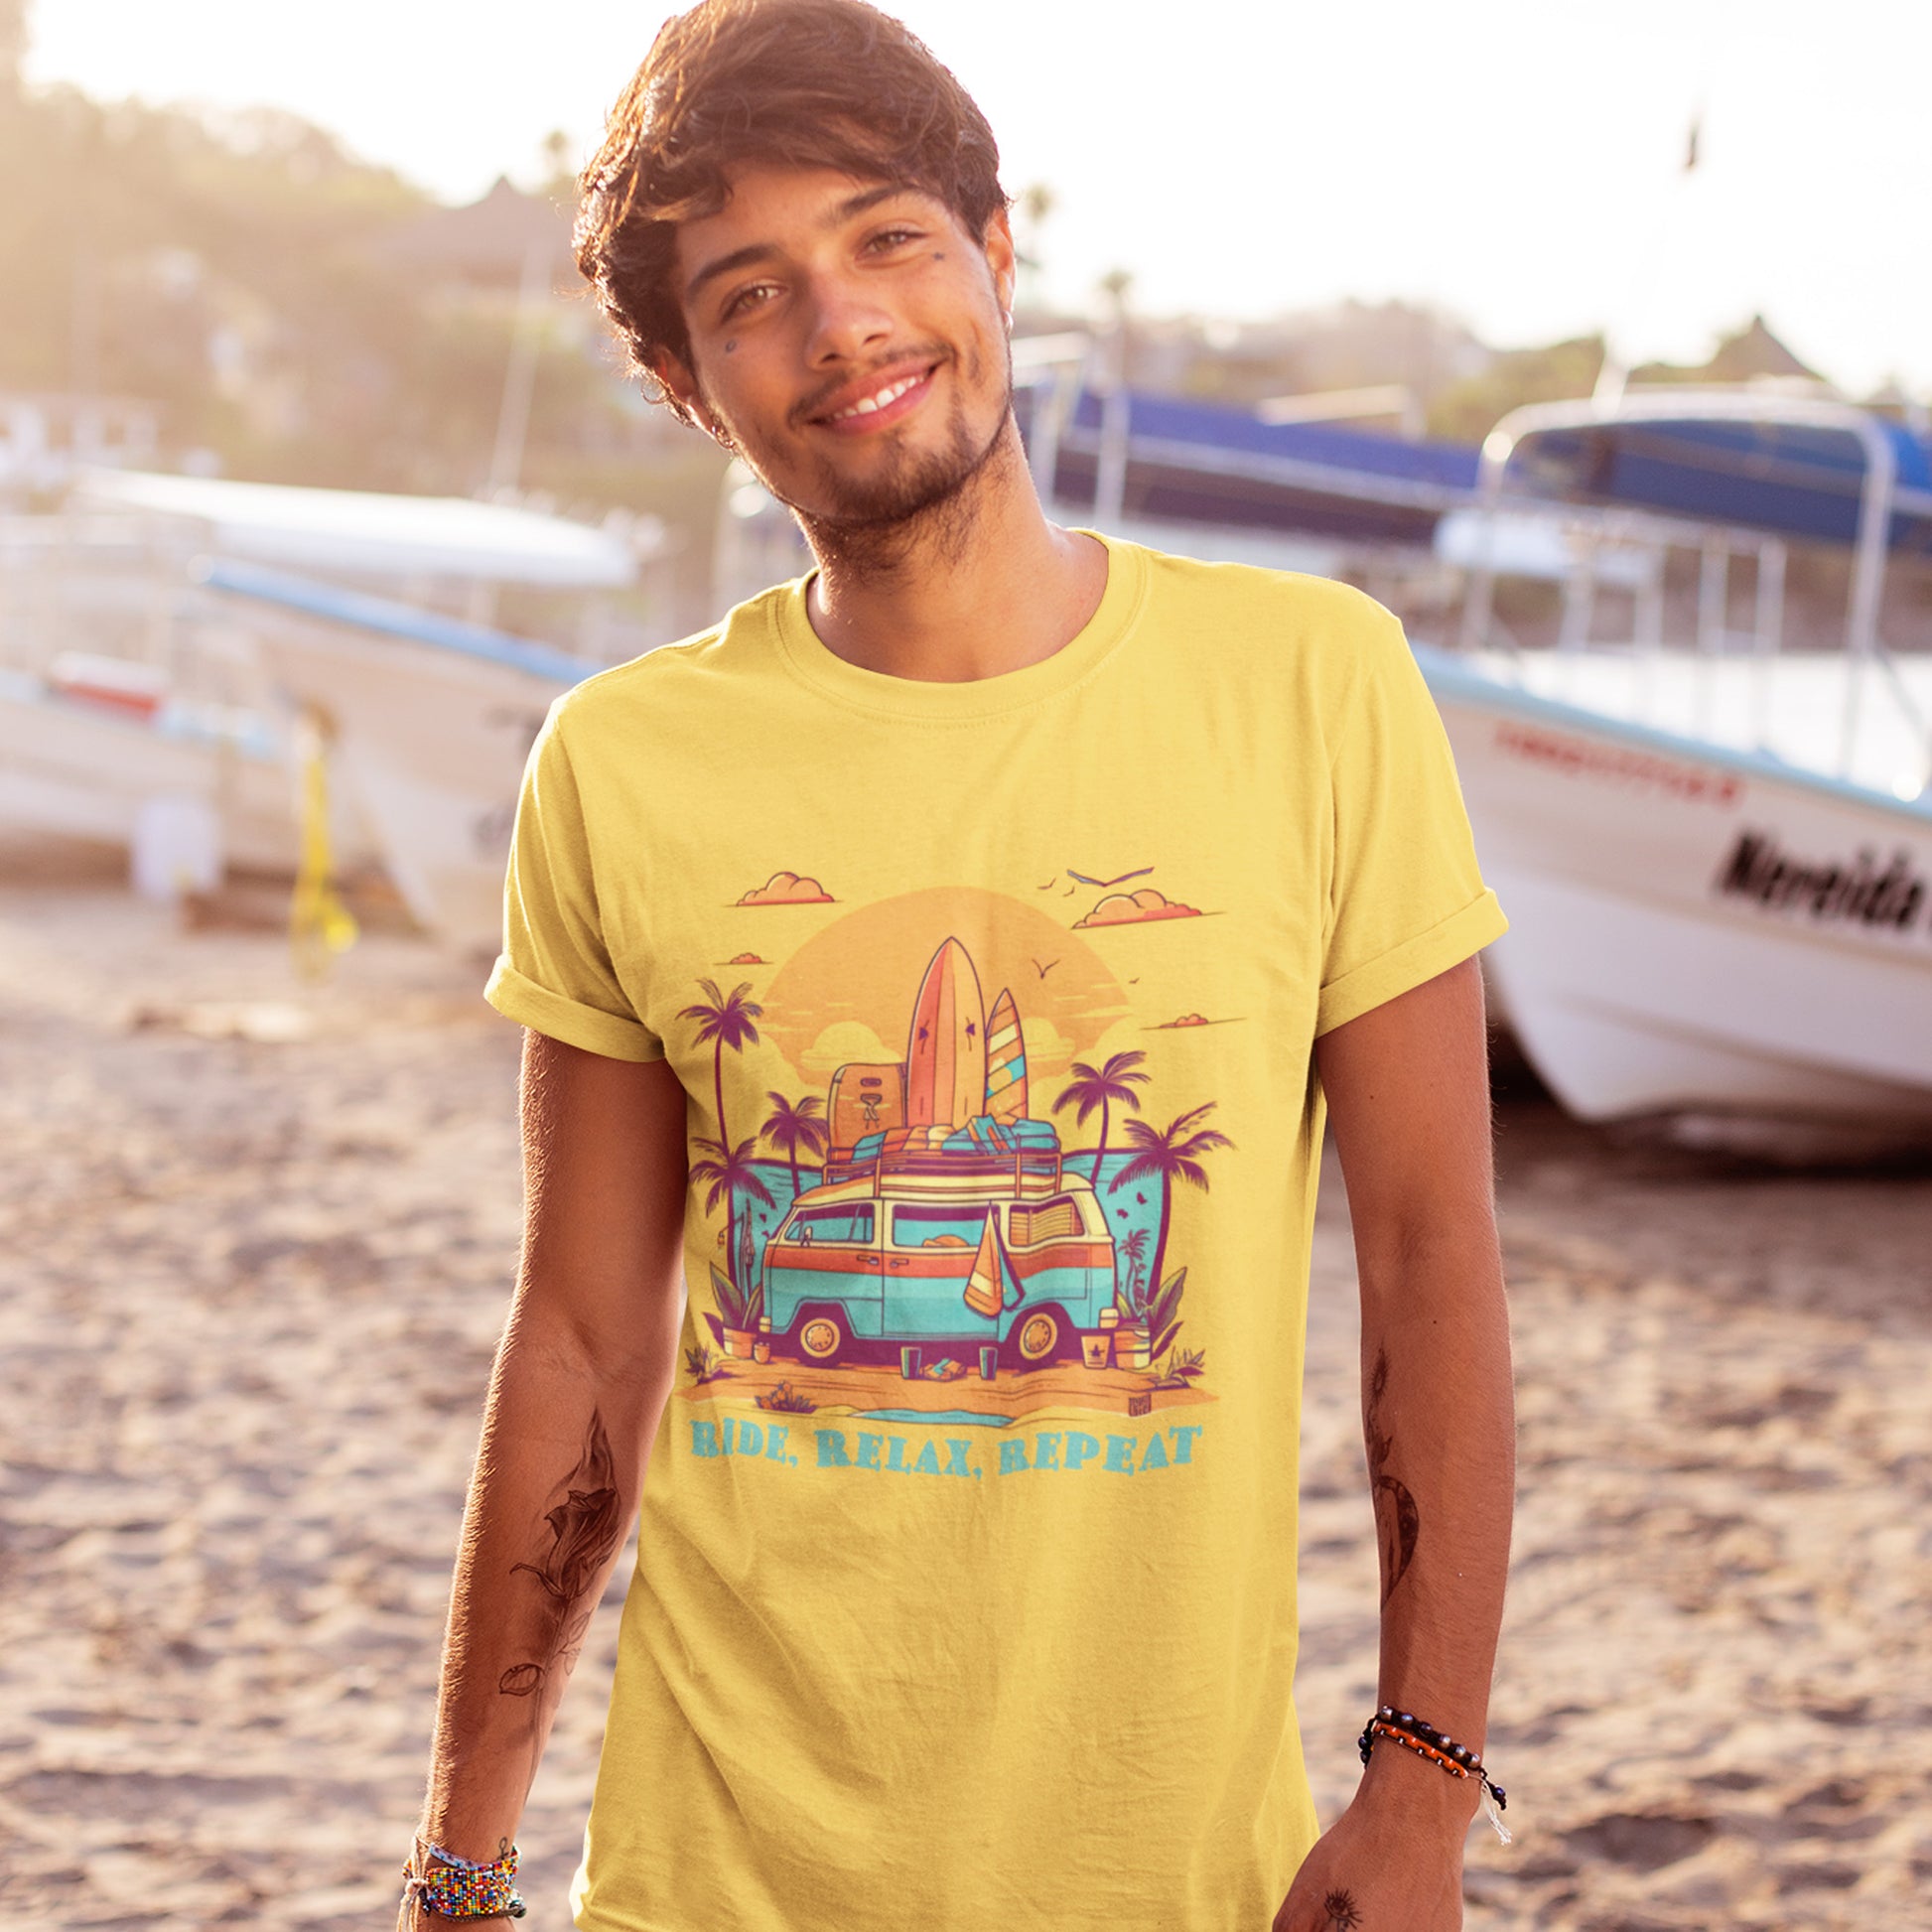 Male model wearing Unisex "Ride, Relax, Repeat" T-Shirt in Yellow on a beach.